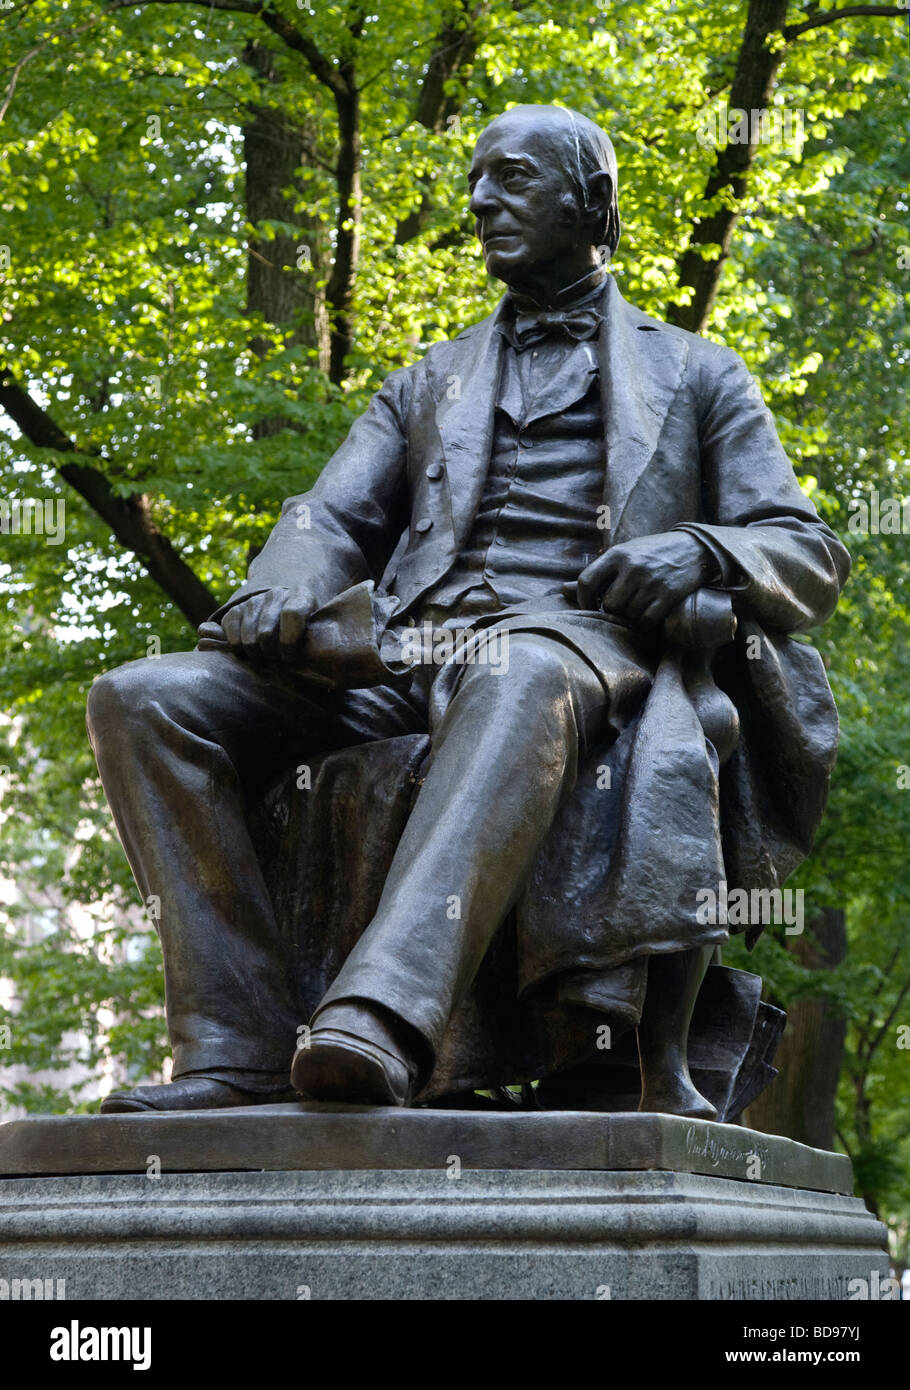 A statue of a historical figure located in the parkway along COMMONWEALTH AVENUE BOSTON MASSACHUSETTS Stock Photo